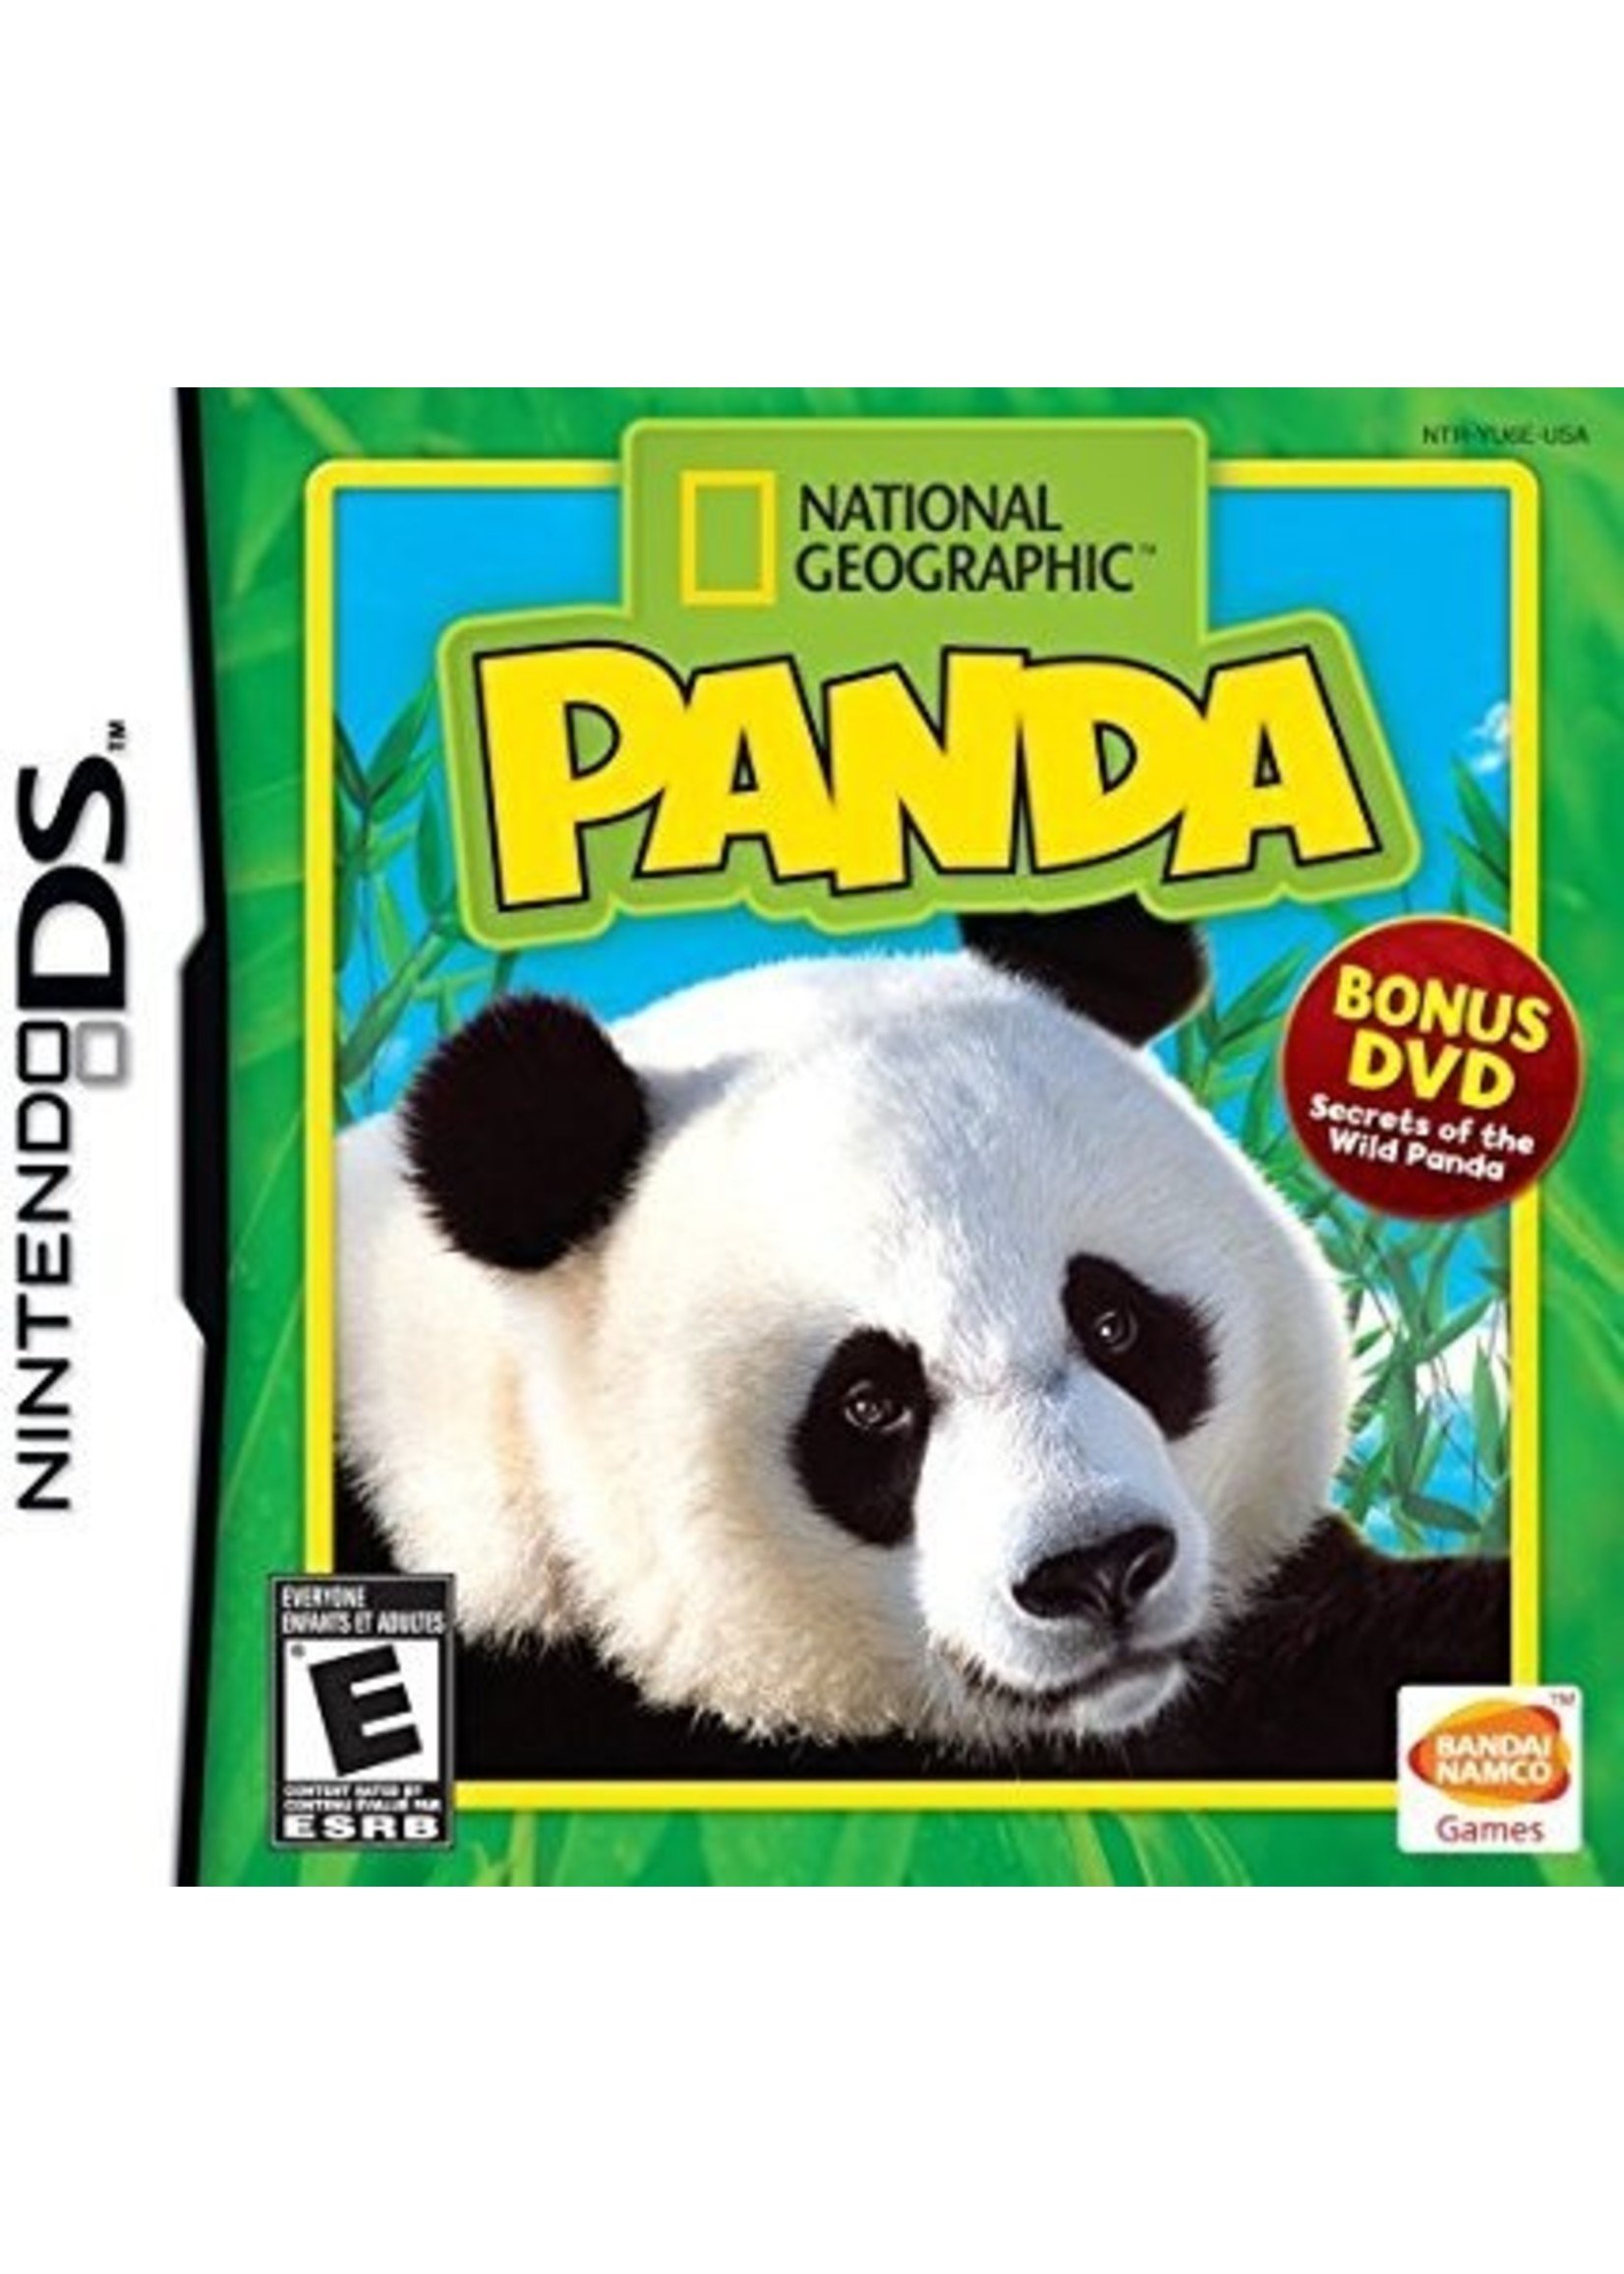 Nintendo DS National Geographic Panda - Cart Only